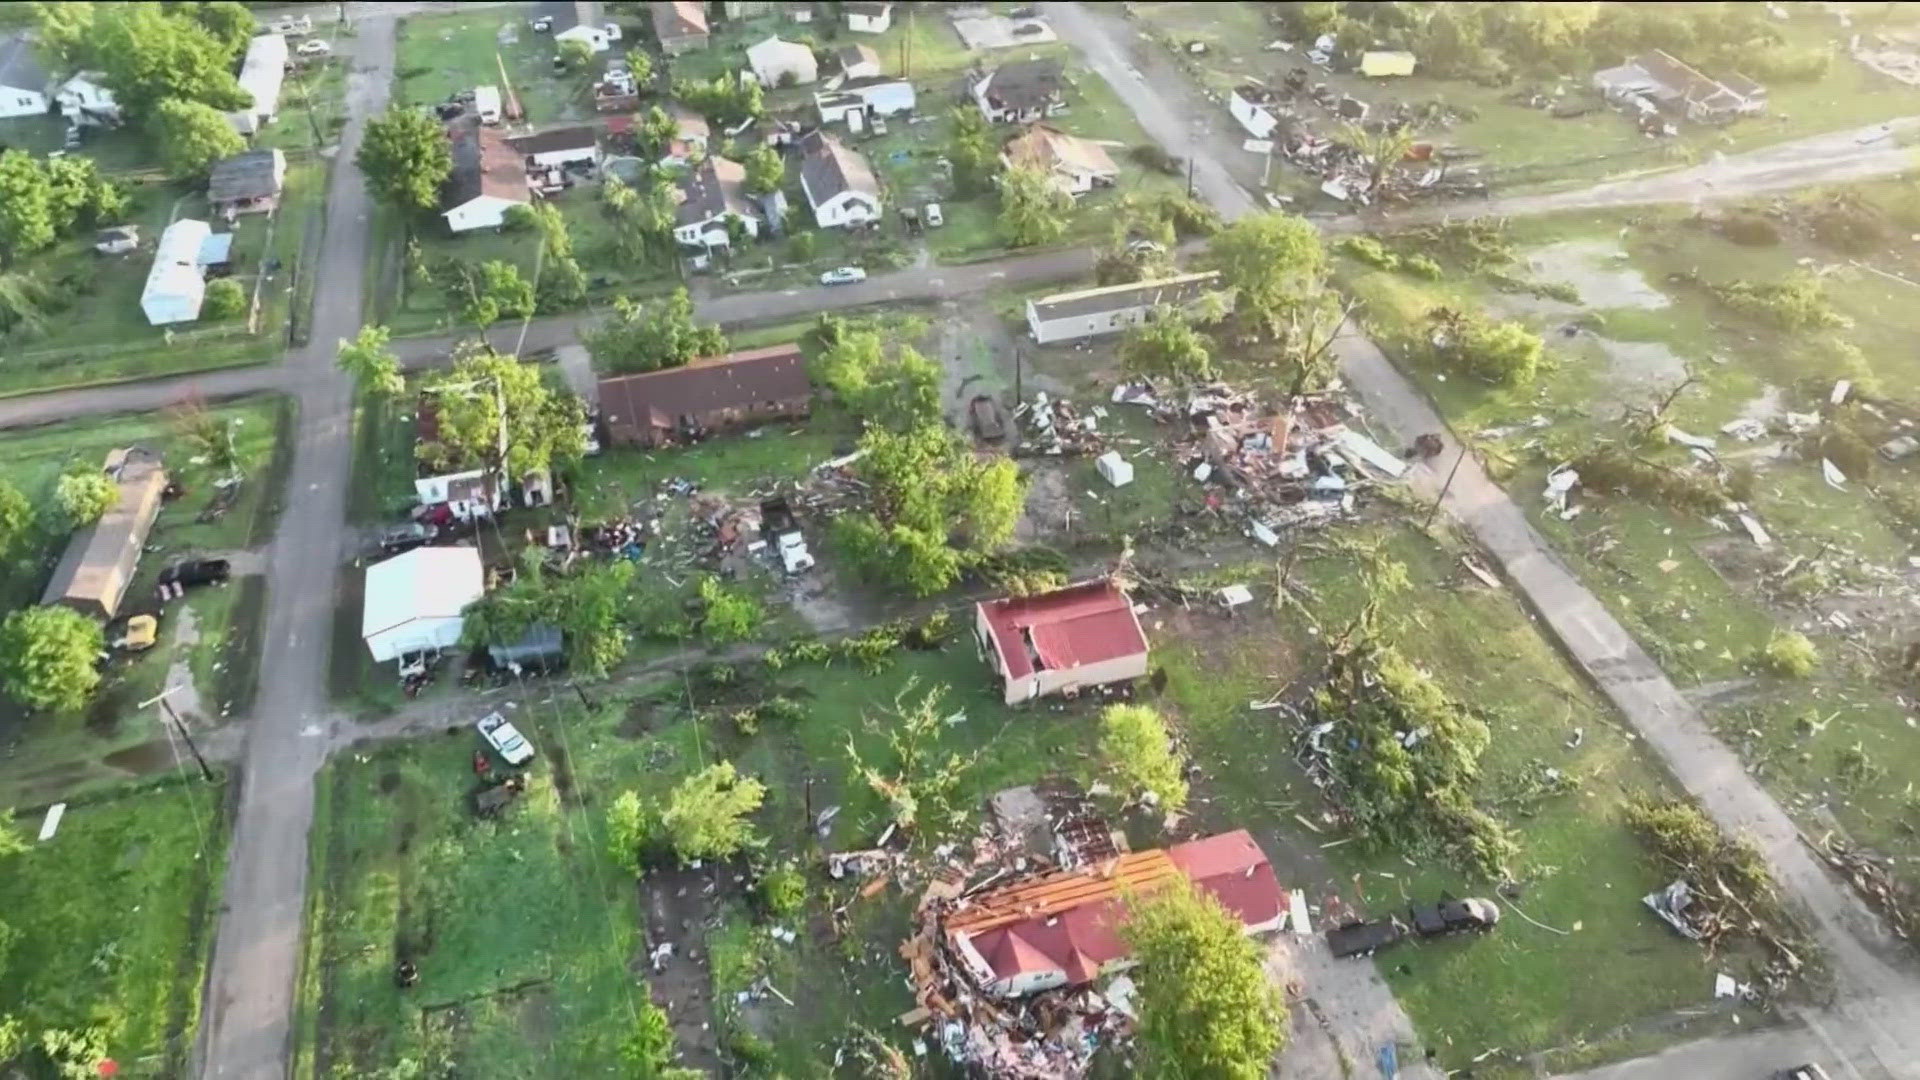 Overnight tornadoes are blamed for at least one death in Oklahoma.